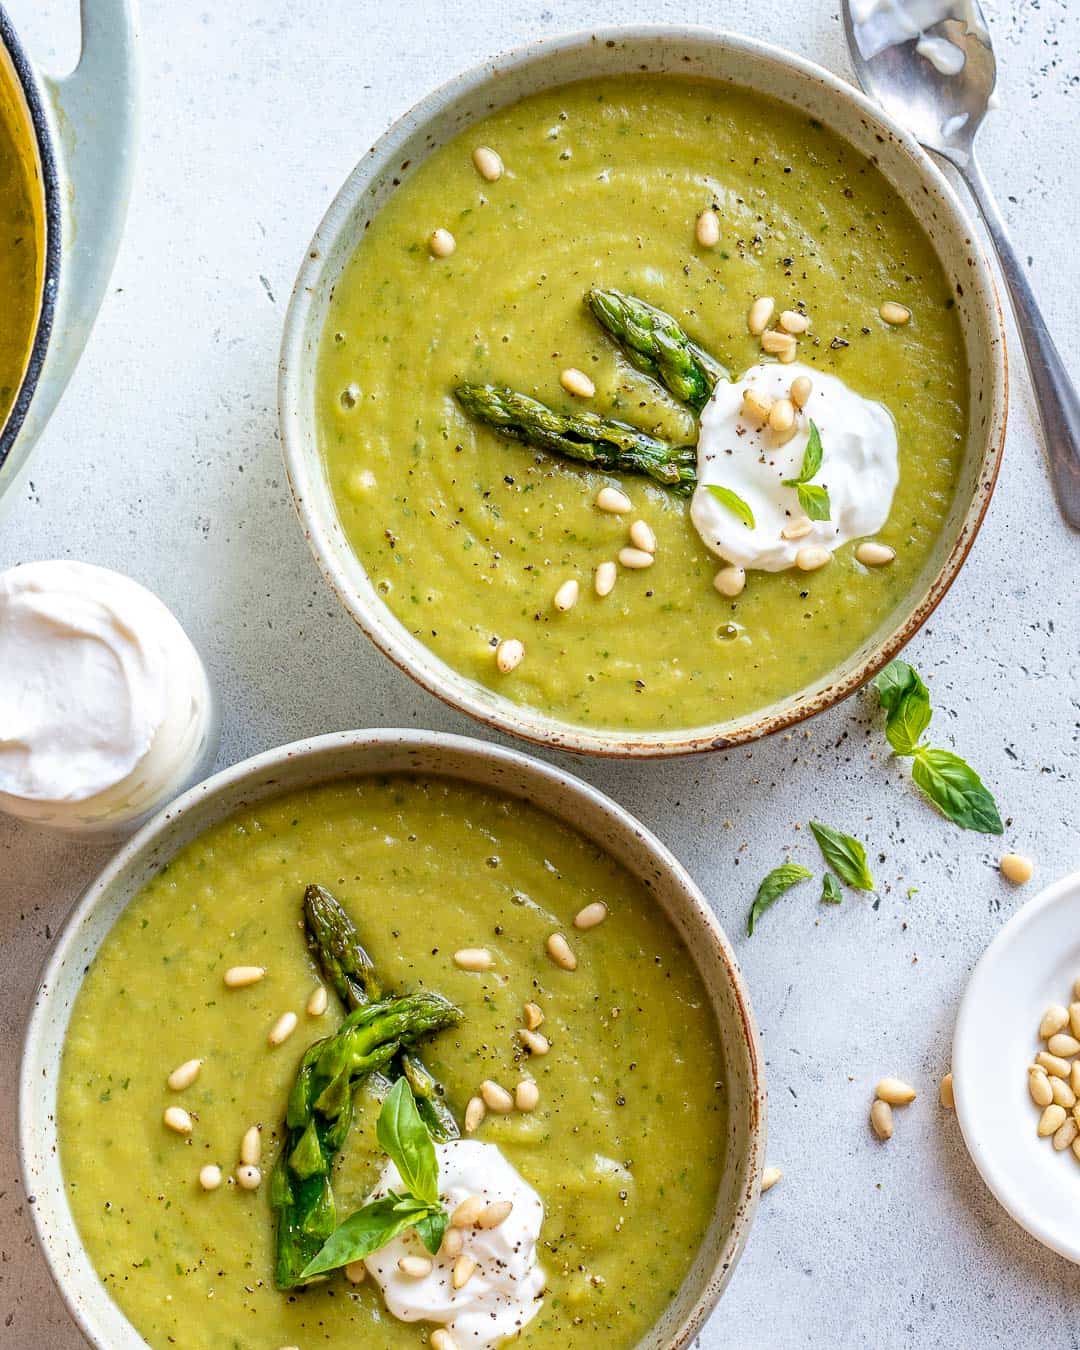 Healthy Asparagus Soup Recipe ladled into two bowls and garnished. 